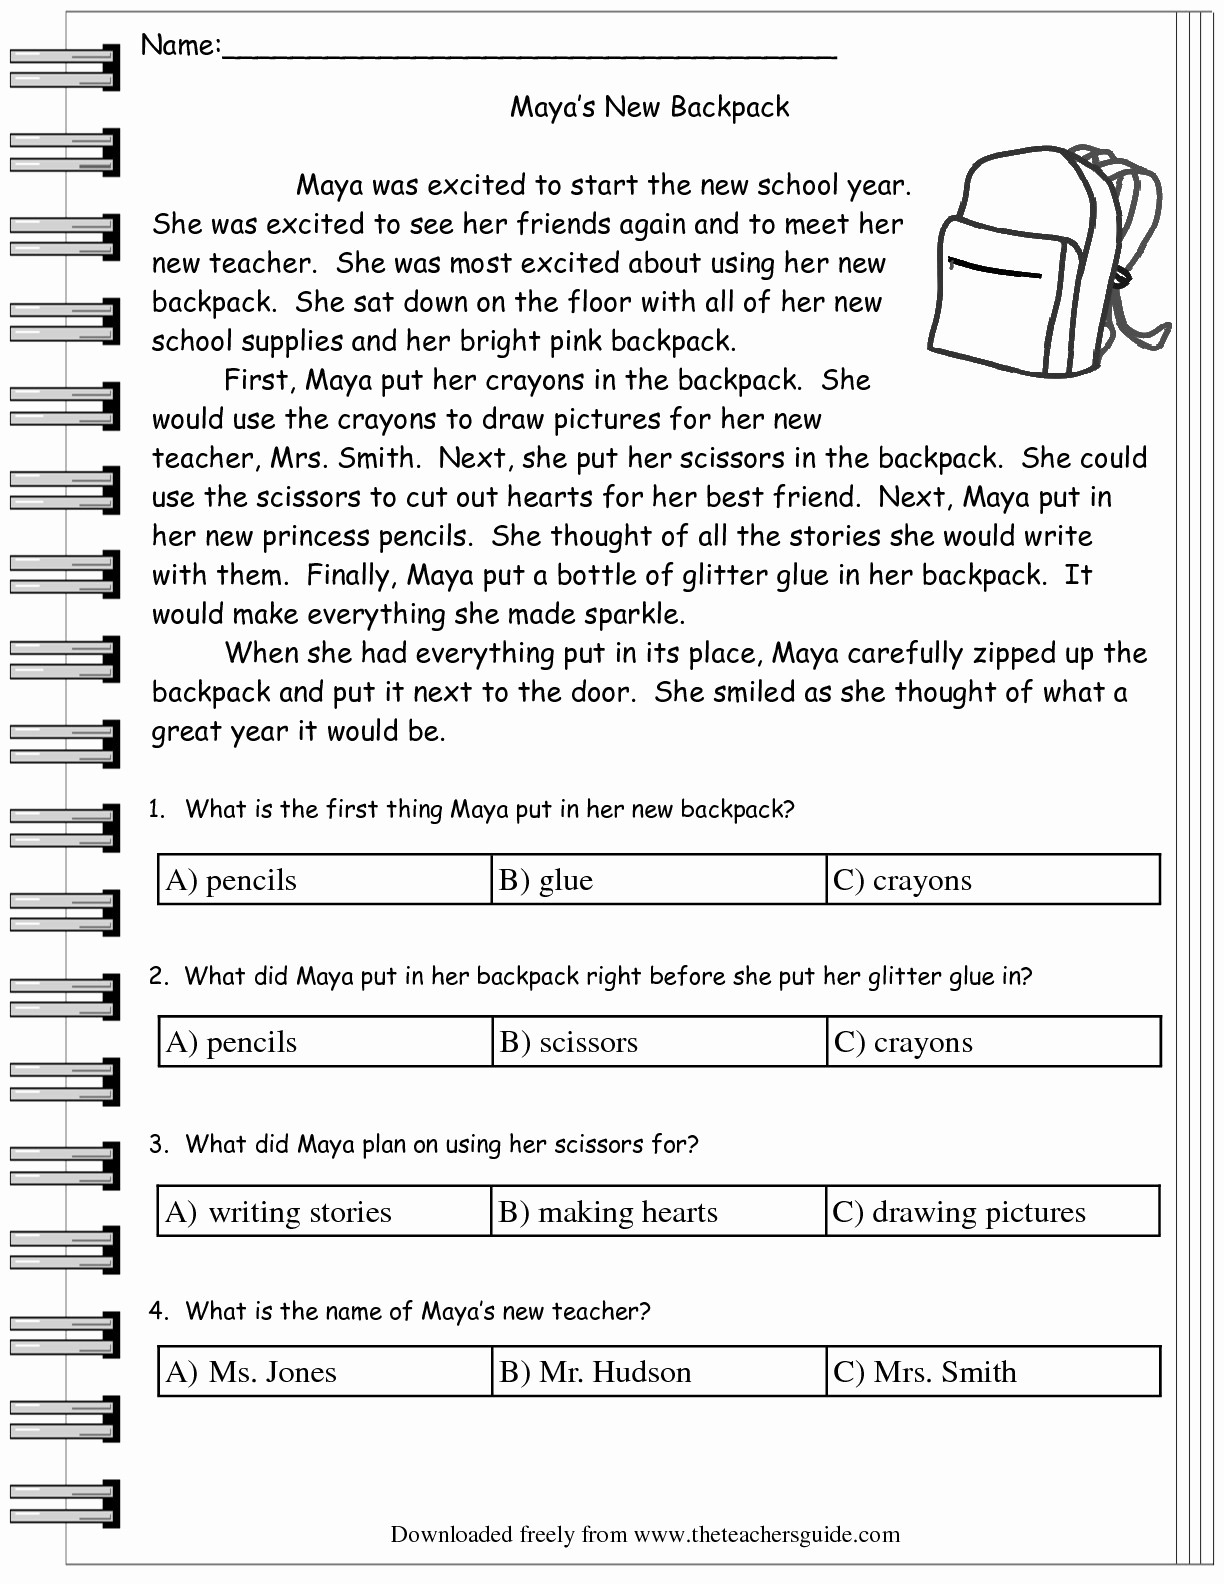 reading-comprehension-worksheets-5th-grade-to-you-math-db-excel